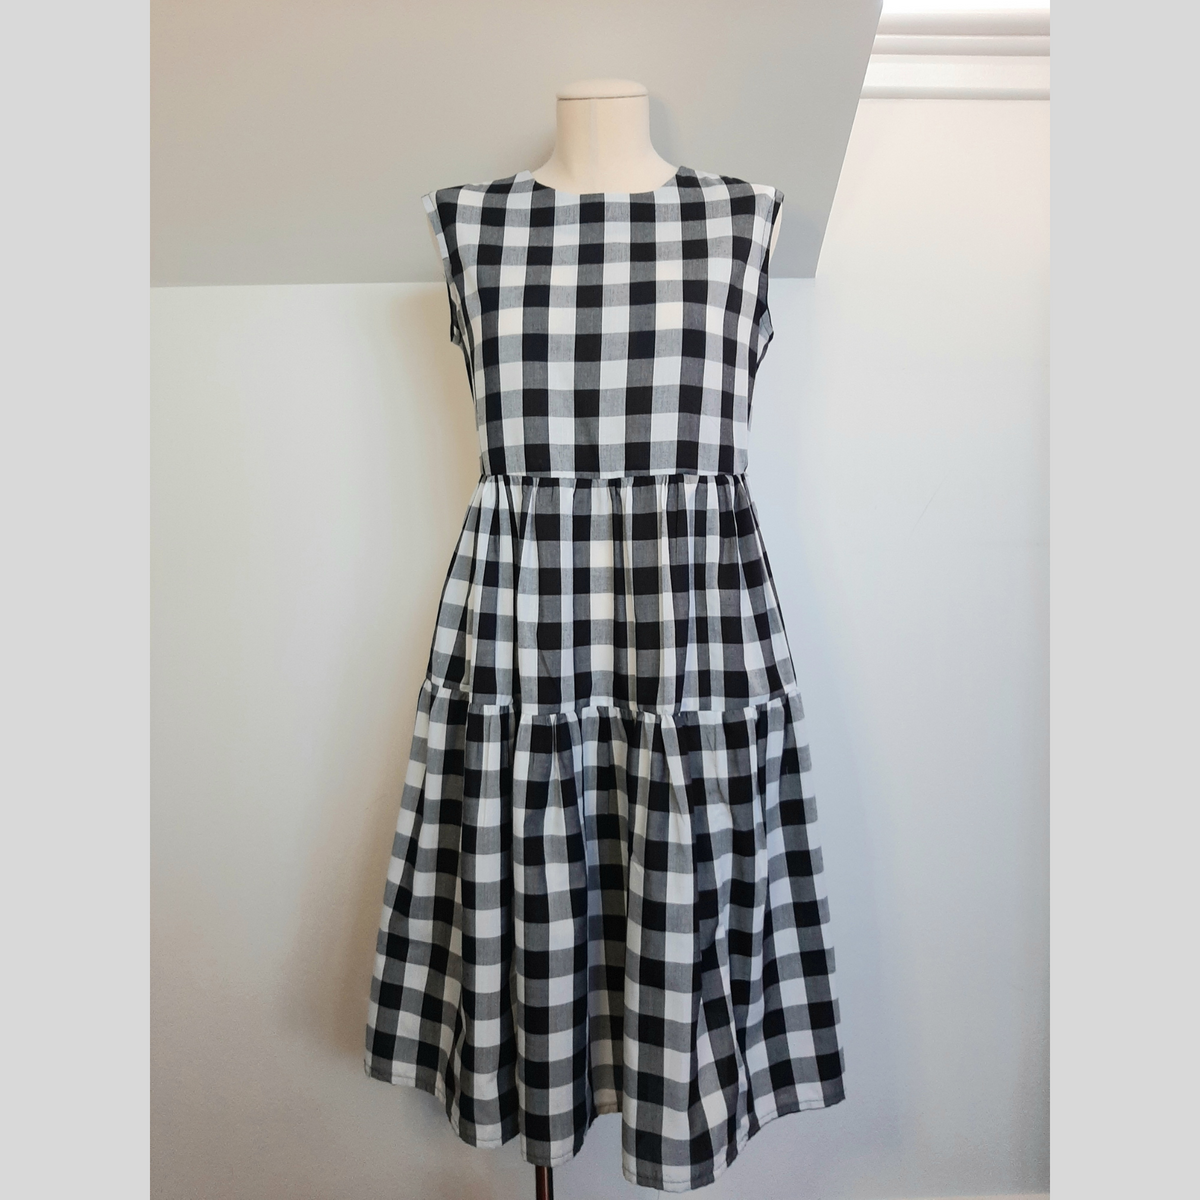 FrocKit 64C - McCalls 7948 (M7948) Dress View C - Poly Cotton Gingham ...